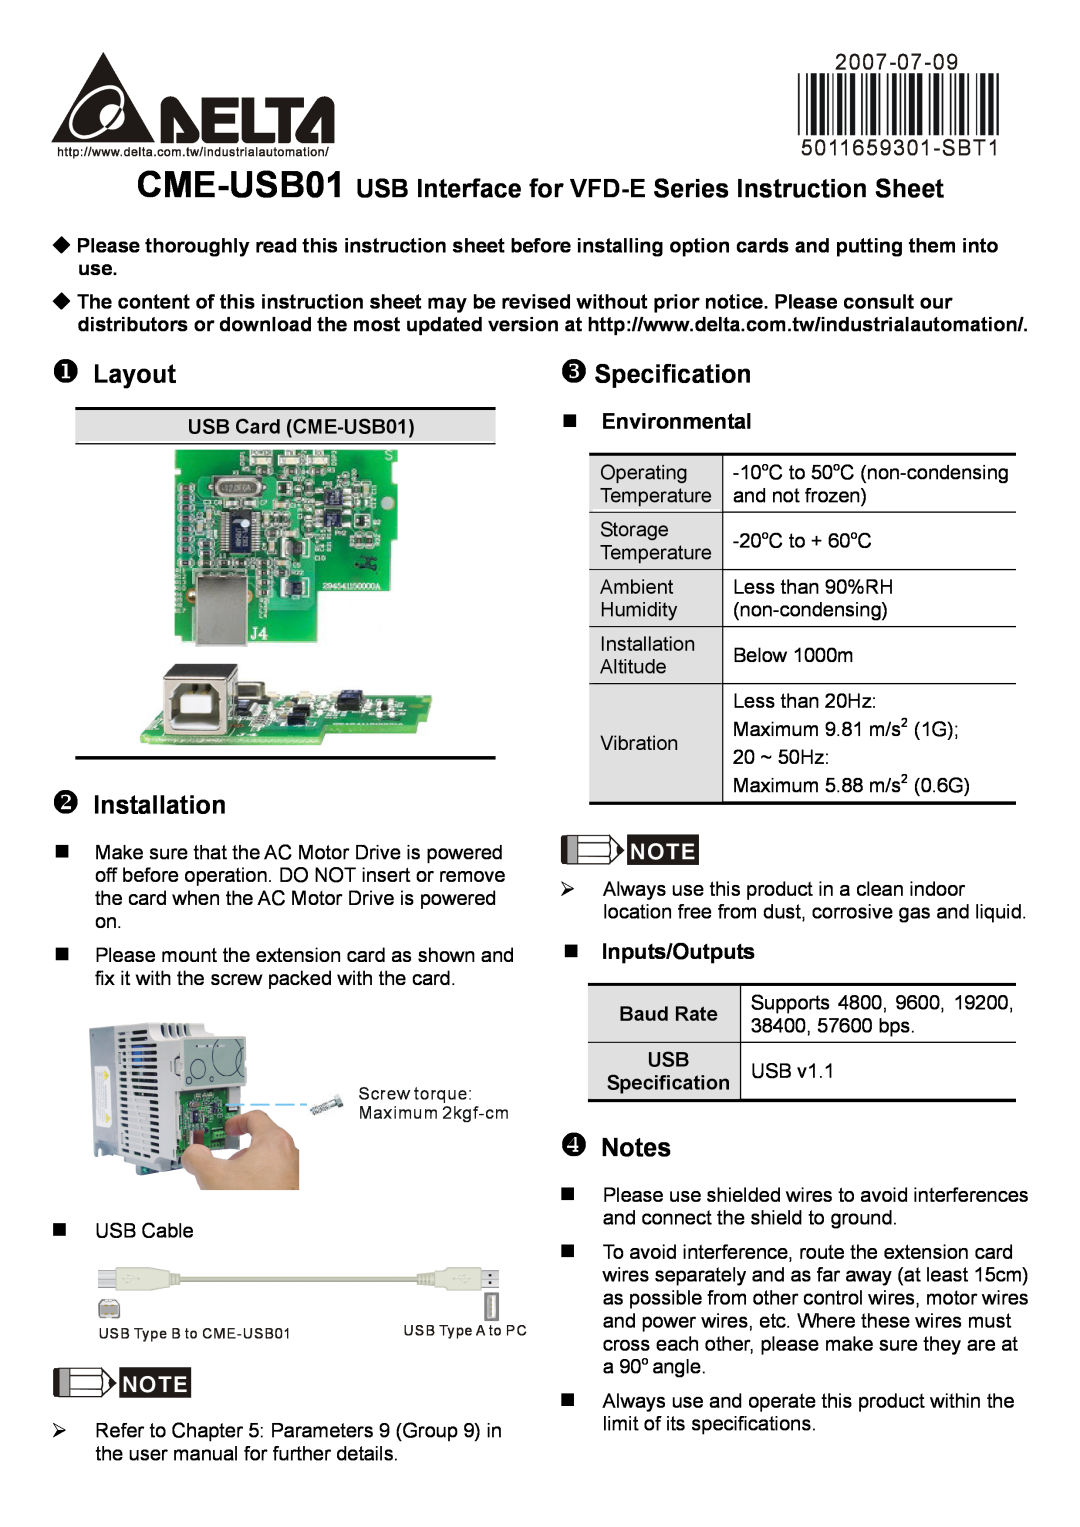 Delta Electronics CME-USB01 instruction sheet Environmental, Inputs/Outputs, X Layout, Z Specification, Y Installation 